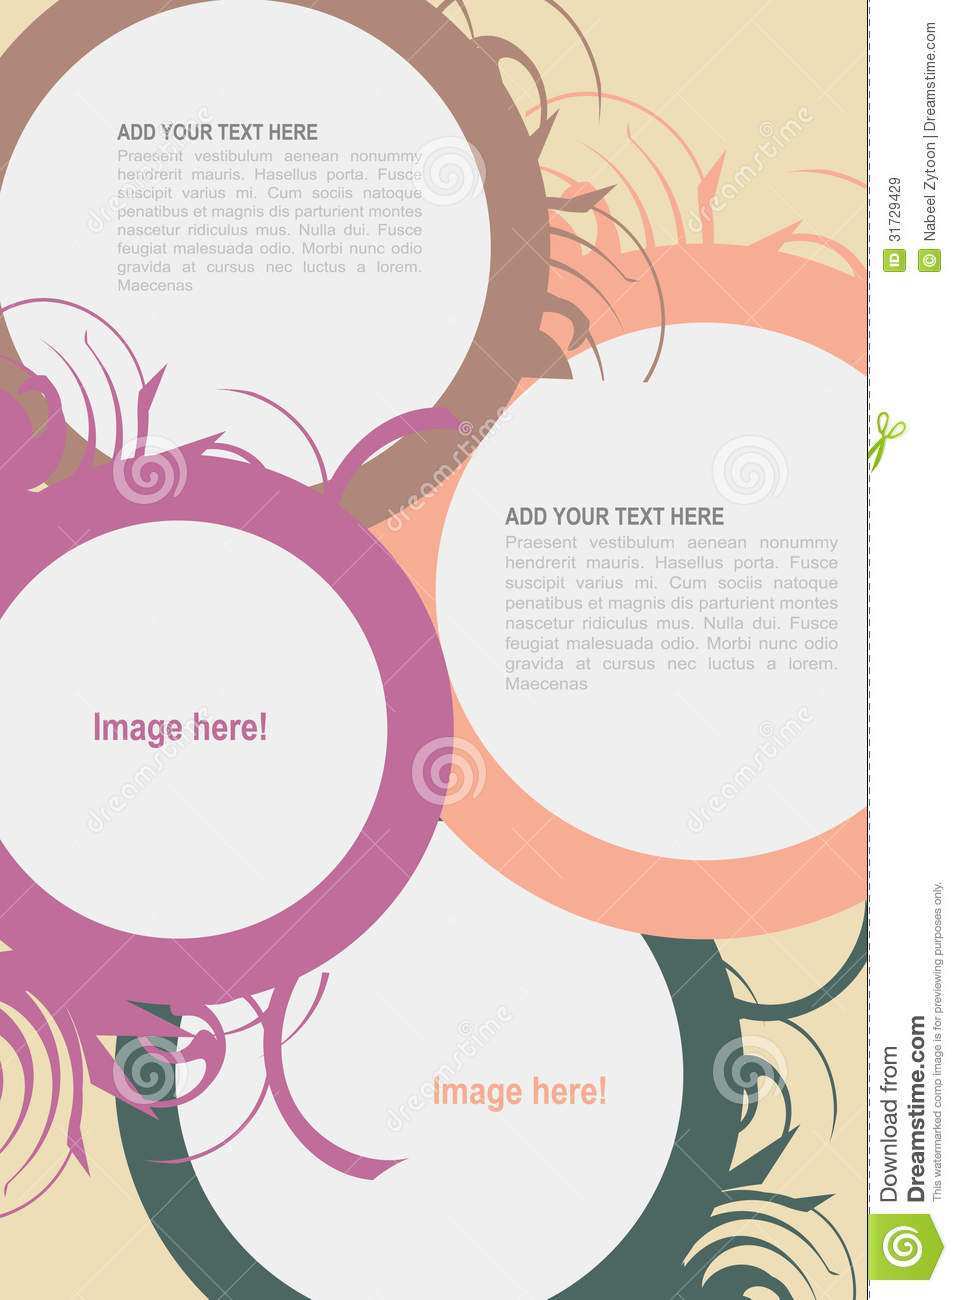 12 Editable Flyer Templates Download Layouts for Editable Flyer Templates Download